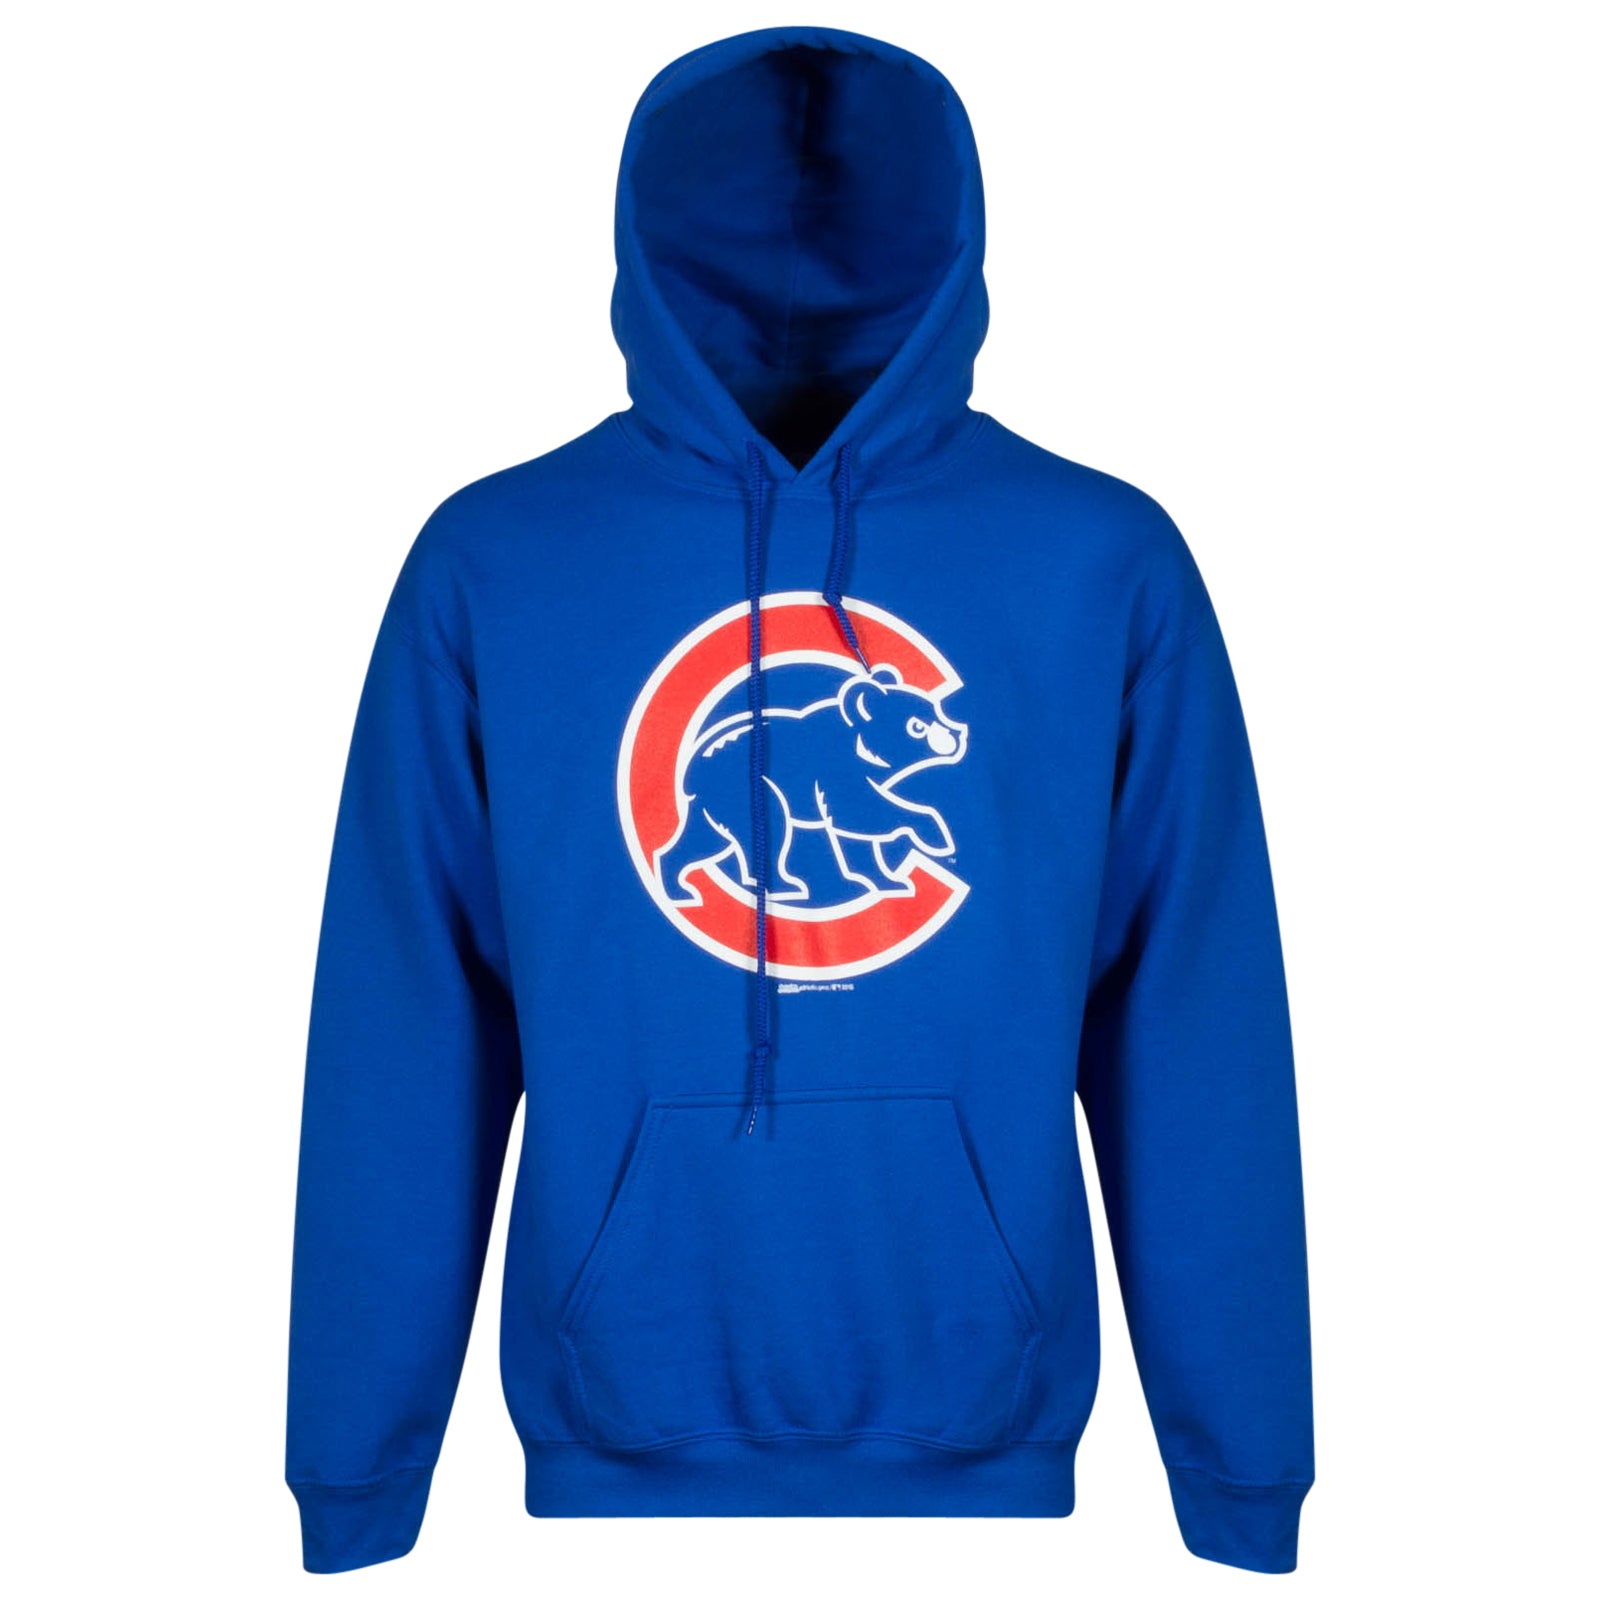 Chicago Cubs Royal 1979 - 1993 Logo Youth Hoodie - Clark Street Sports